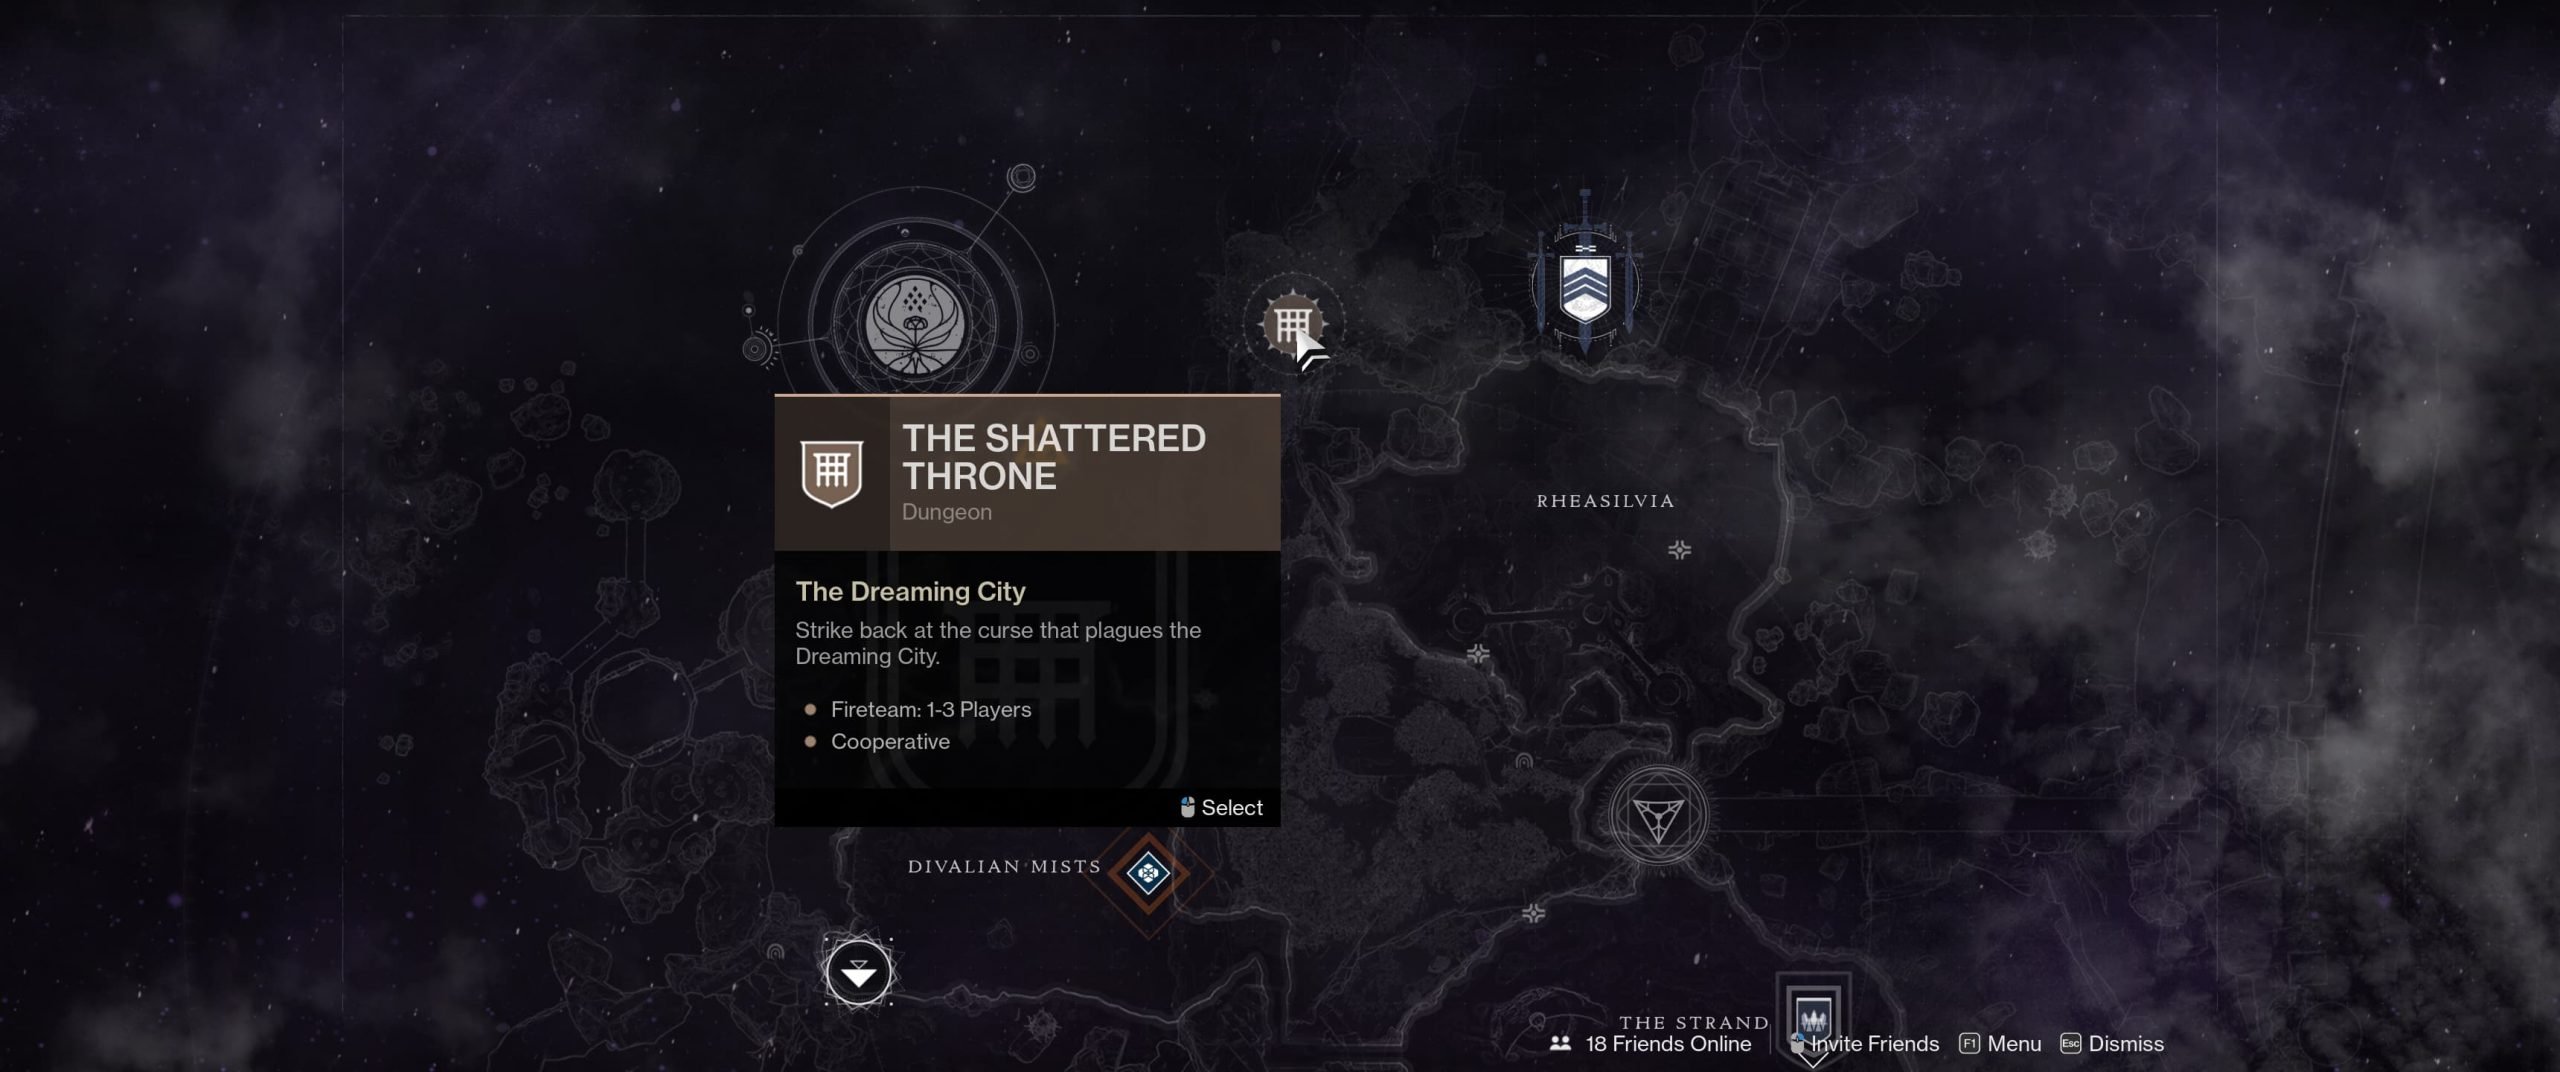 The Shattered Throne